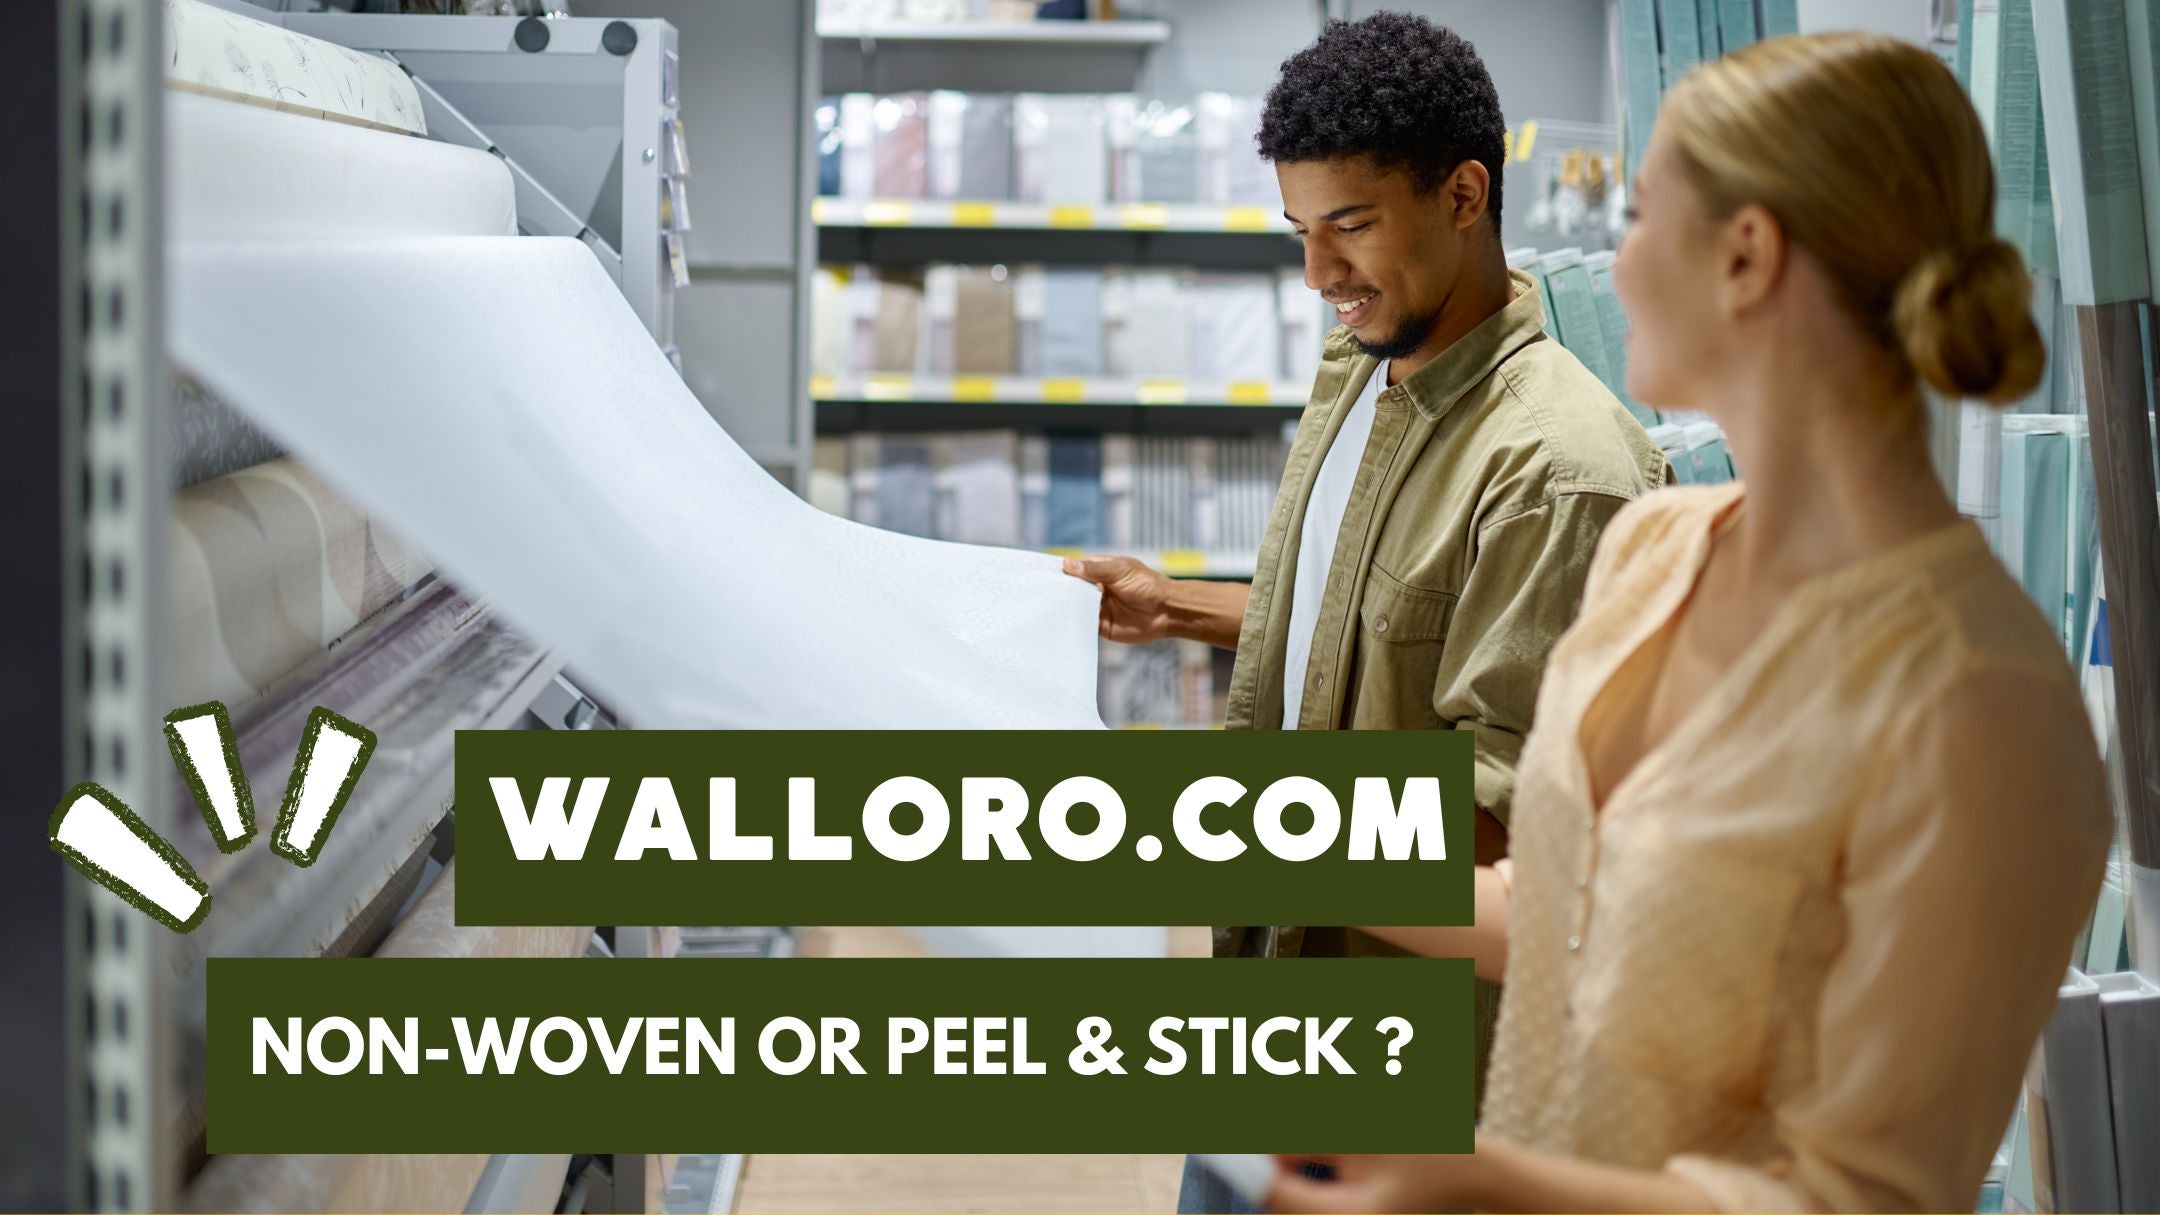 Why won't my peel and stick wallpaper stick to the wall?